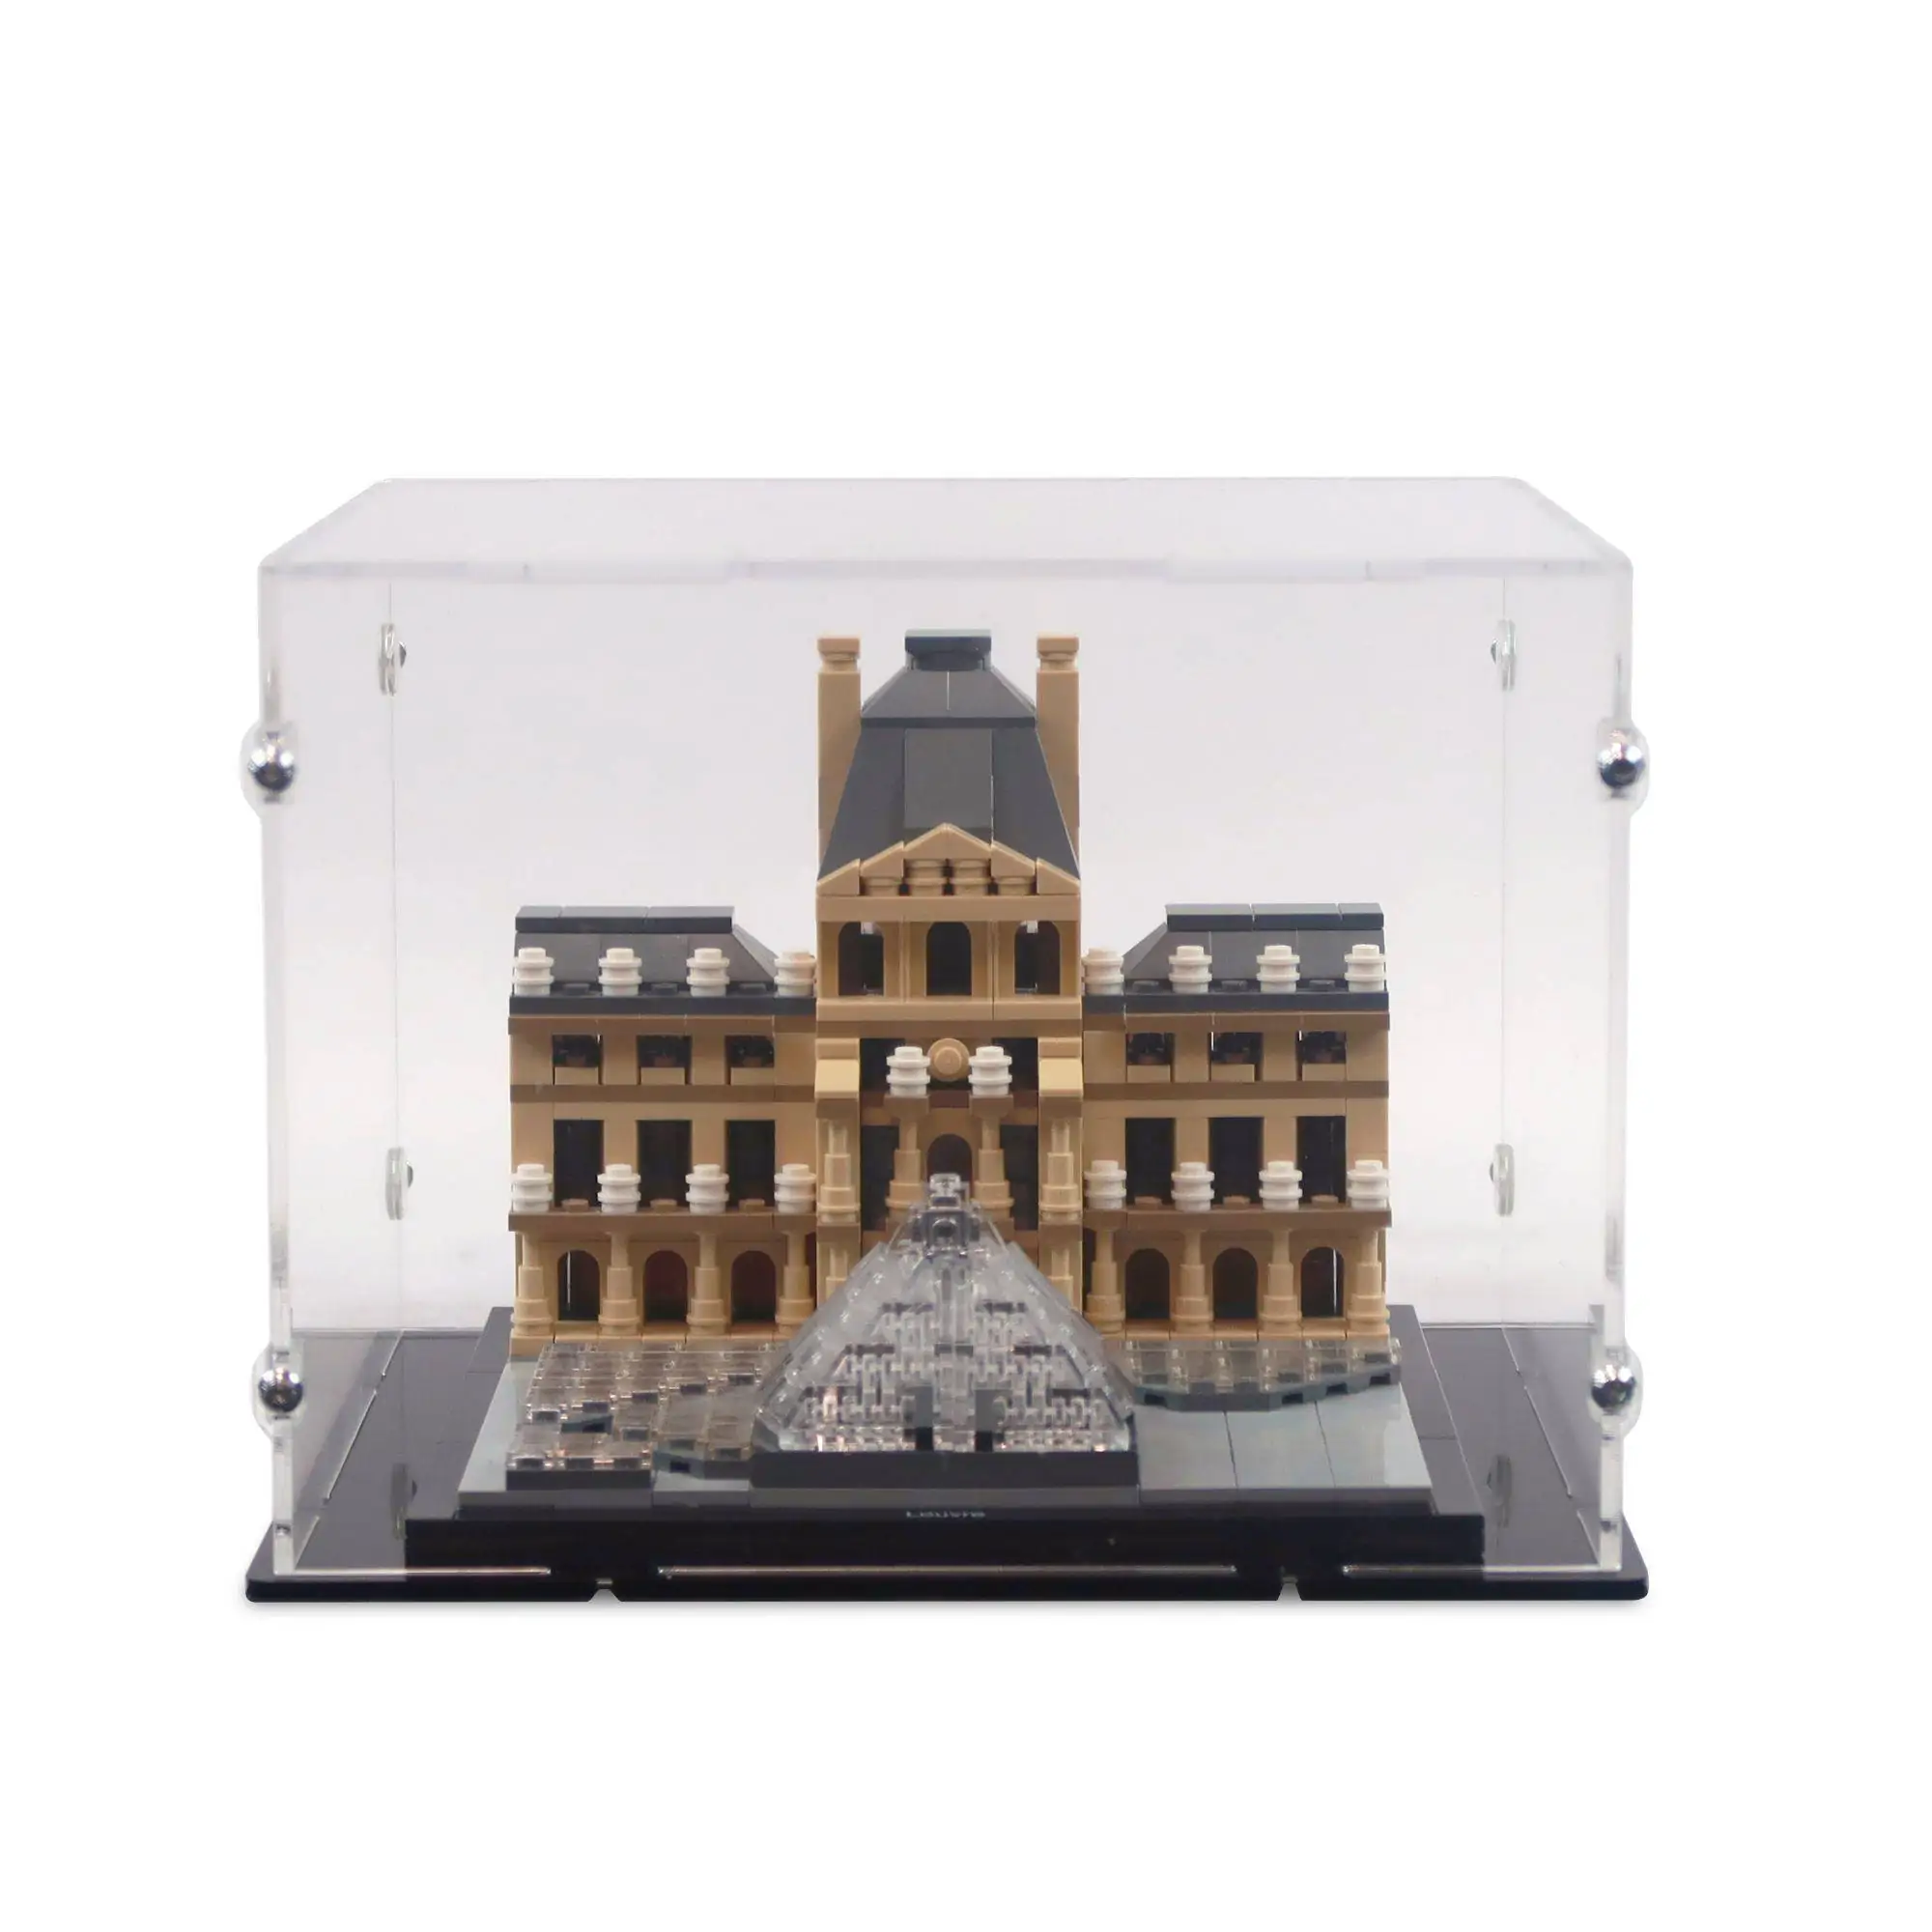 Display Case for LEGO Louvre | iDisplayit